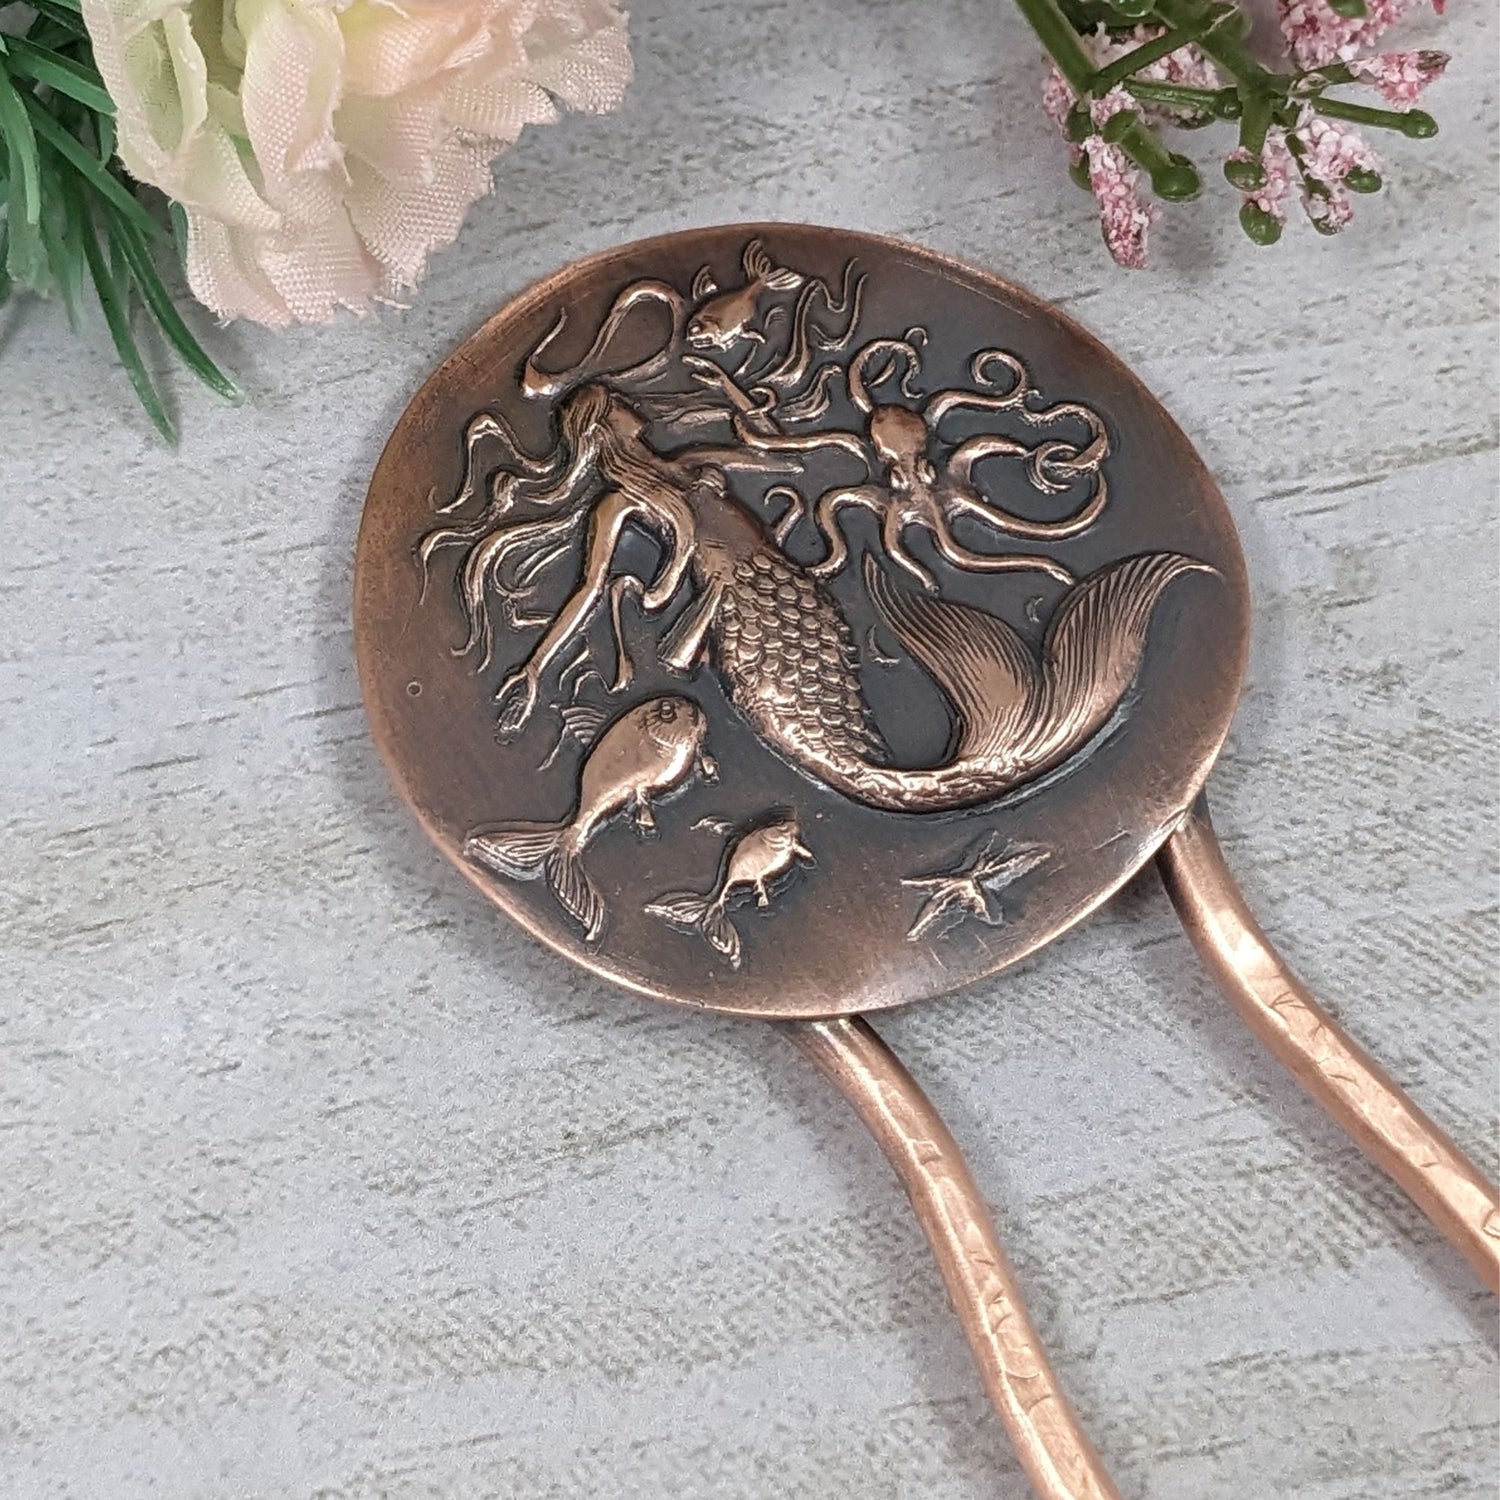 Copper hair fork. At the top is a large round disk with a sea life design impressed in the copper. There is a large mermaid with flowing hair in the center, an octopus to her left, three fish, and a starfish.